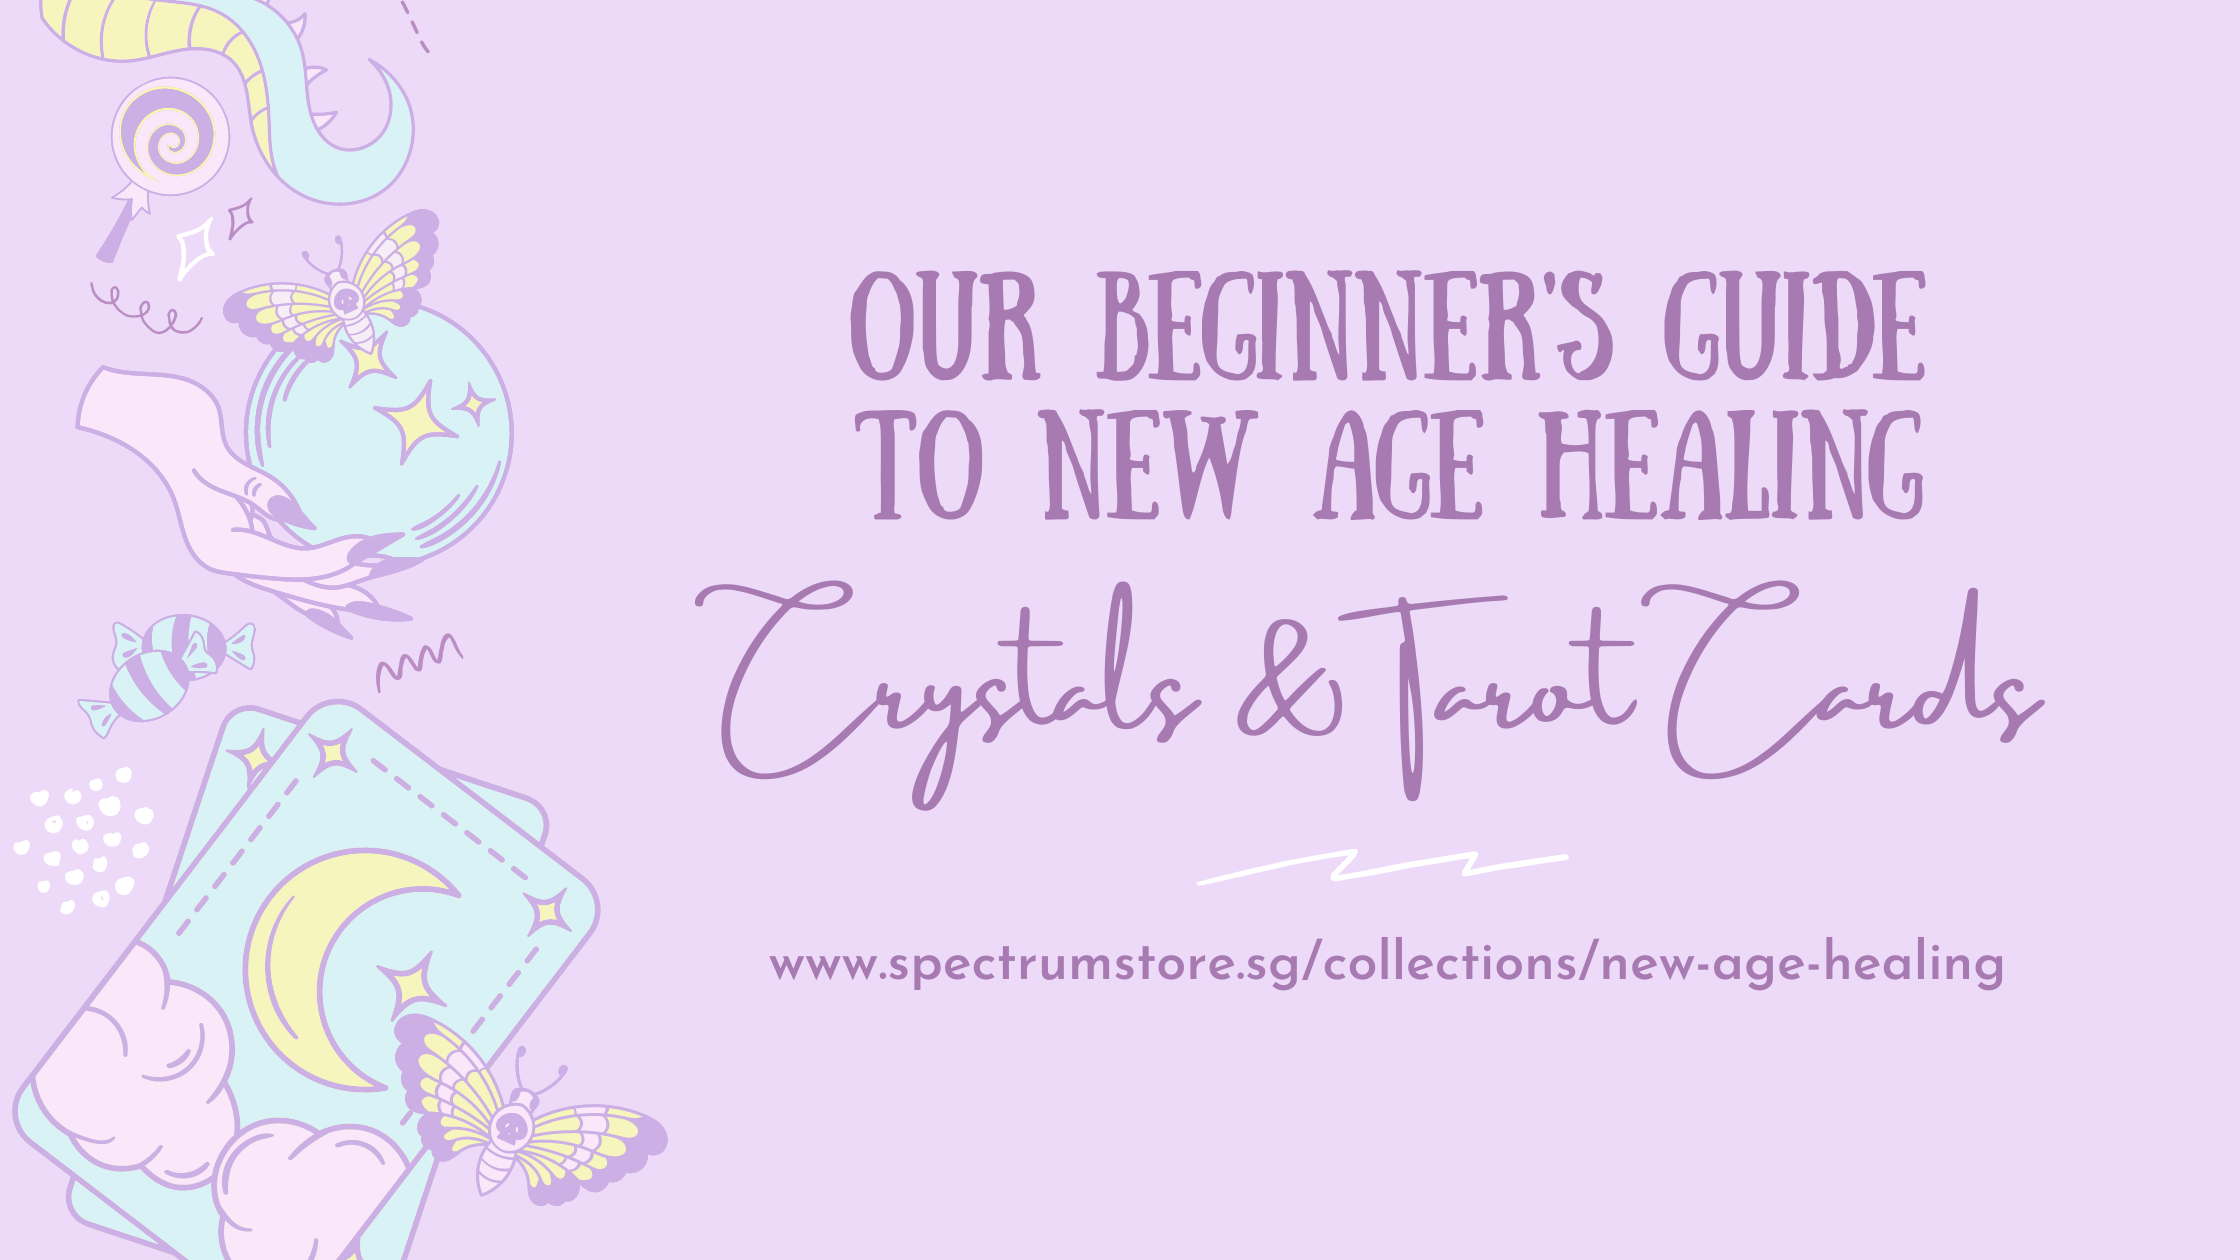 dårlig underkjole nå Our Beginner's Guide to New Age Healing: Crystals and Tarot Cards |  Spectrum Store: Family Lifestyle Store